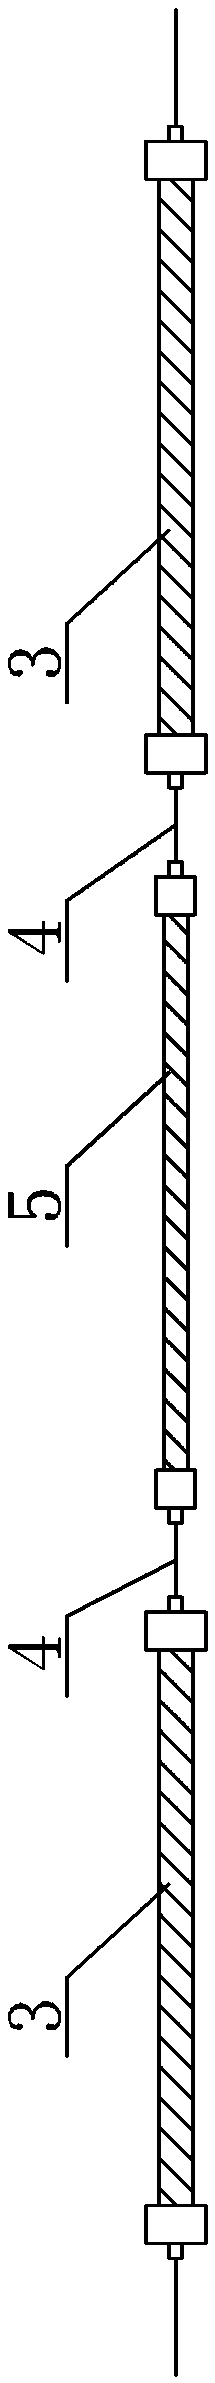 A leaky cable arrangement method applied to a strip-shaped narrow and long area